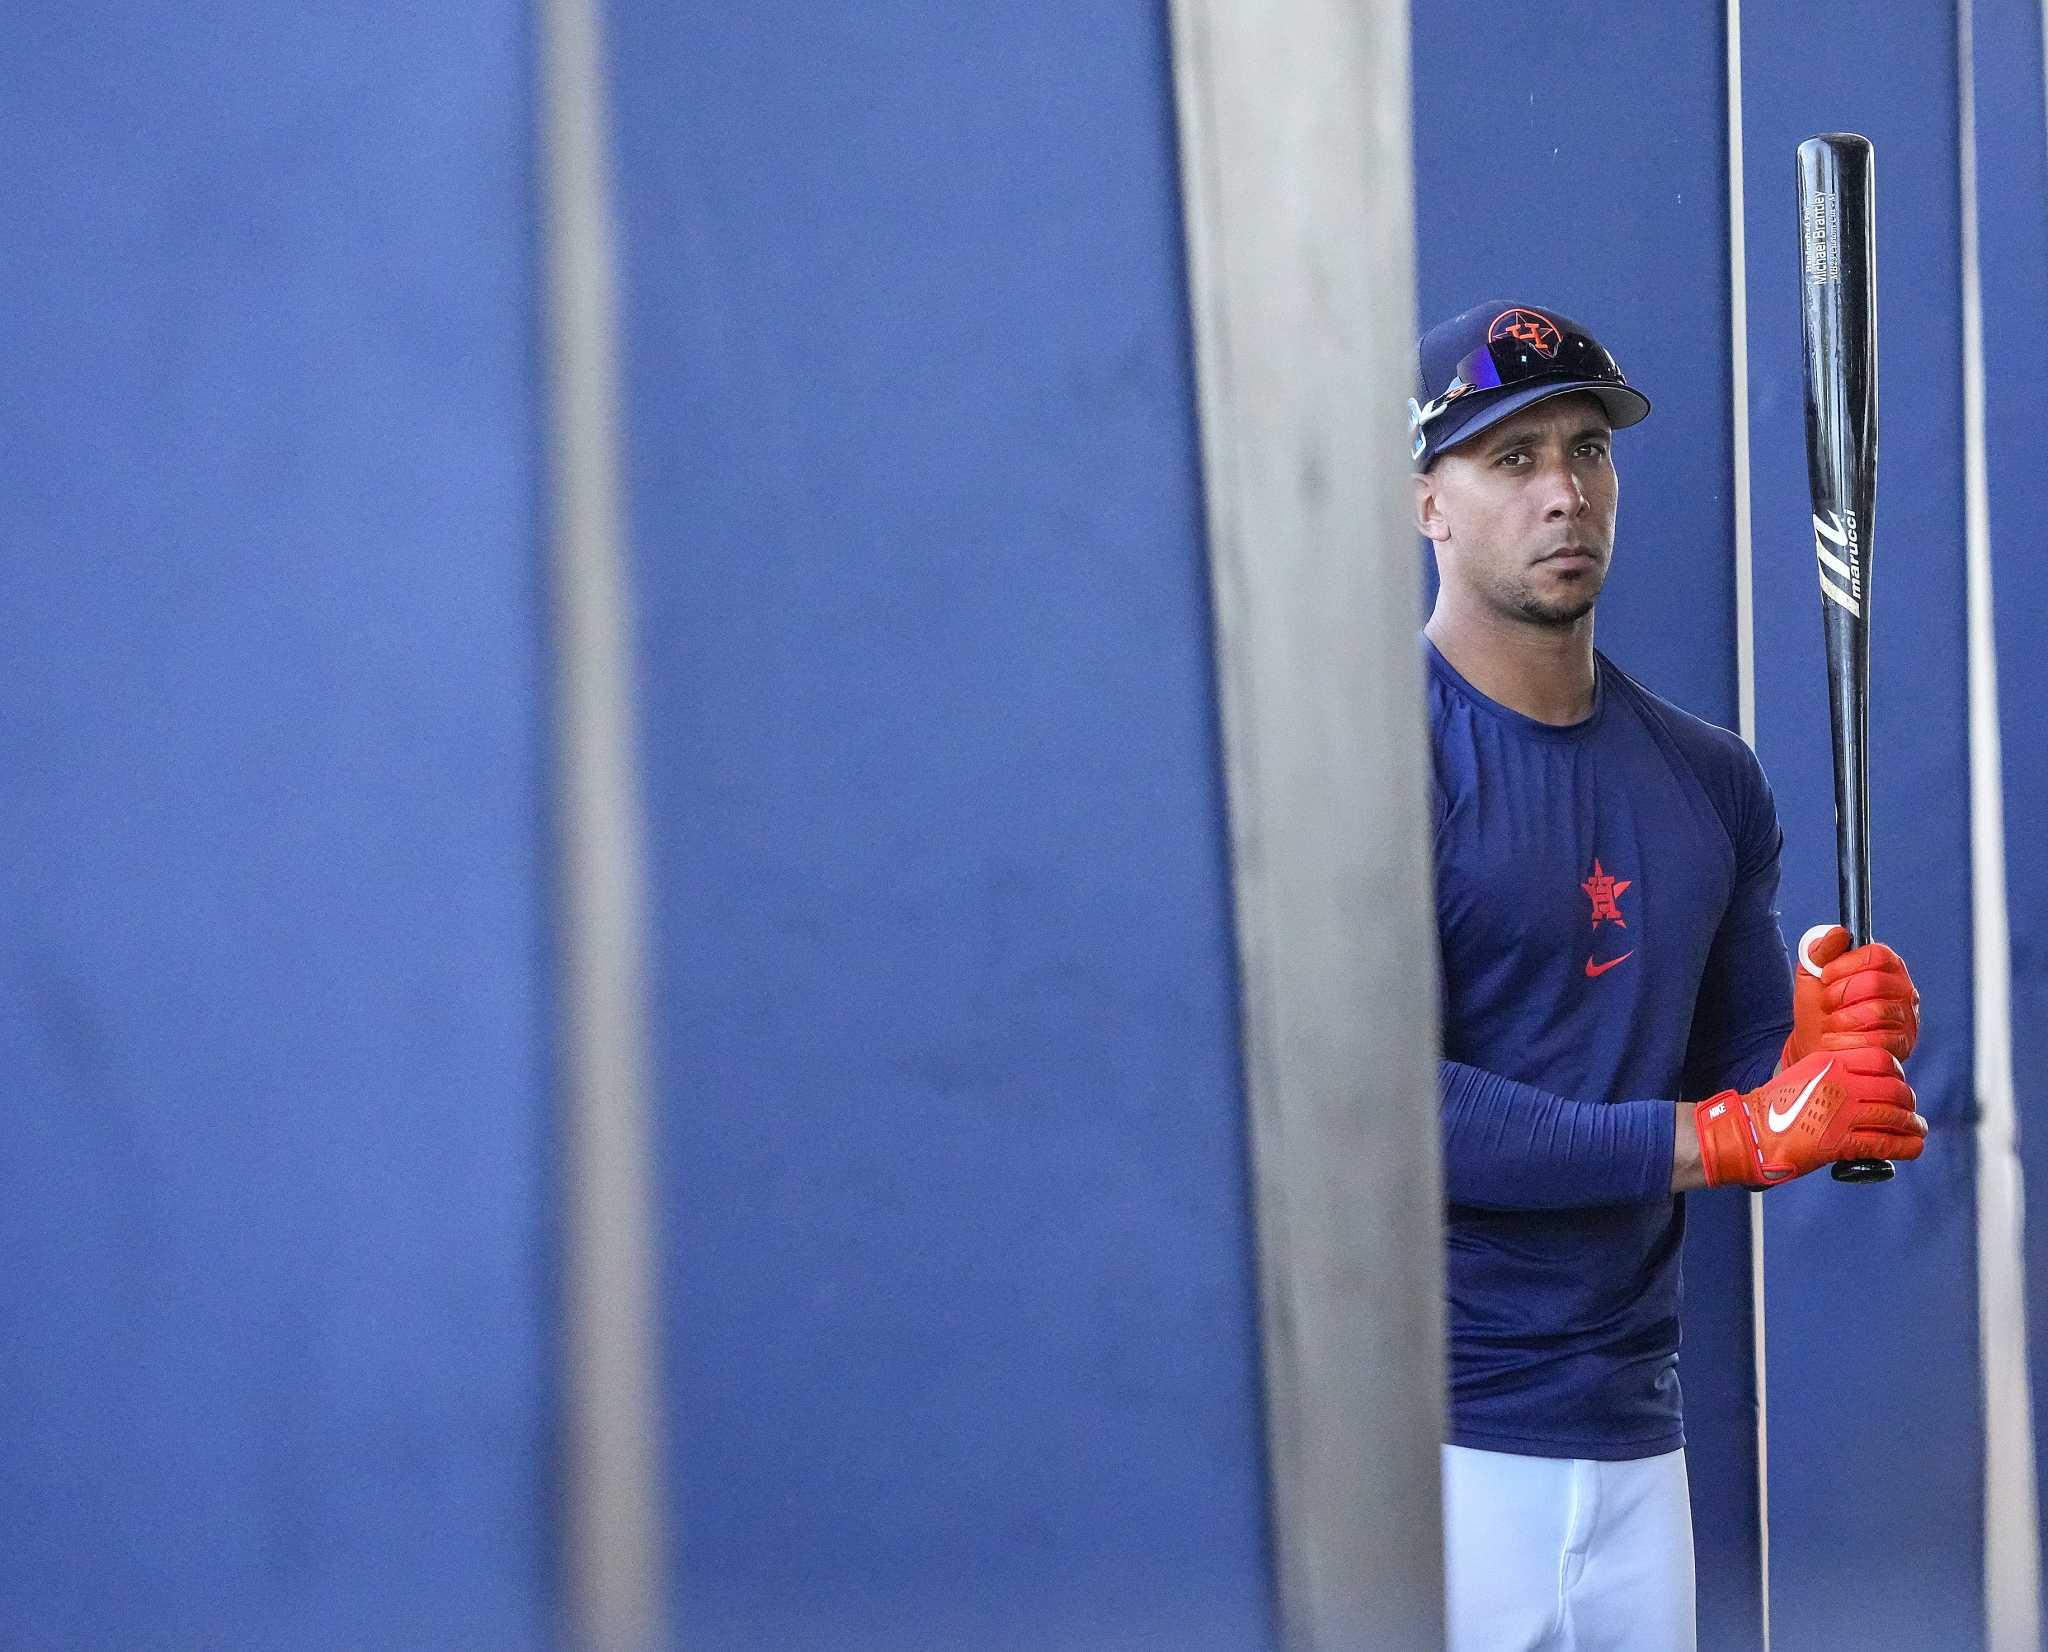 Michael Brantley injury: Astros veteran to miss rest of season after  undergoing shoulder surgery 